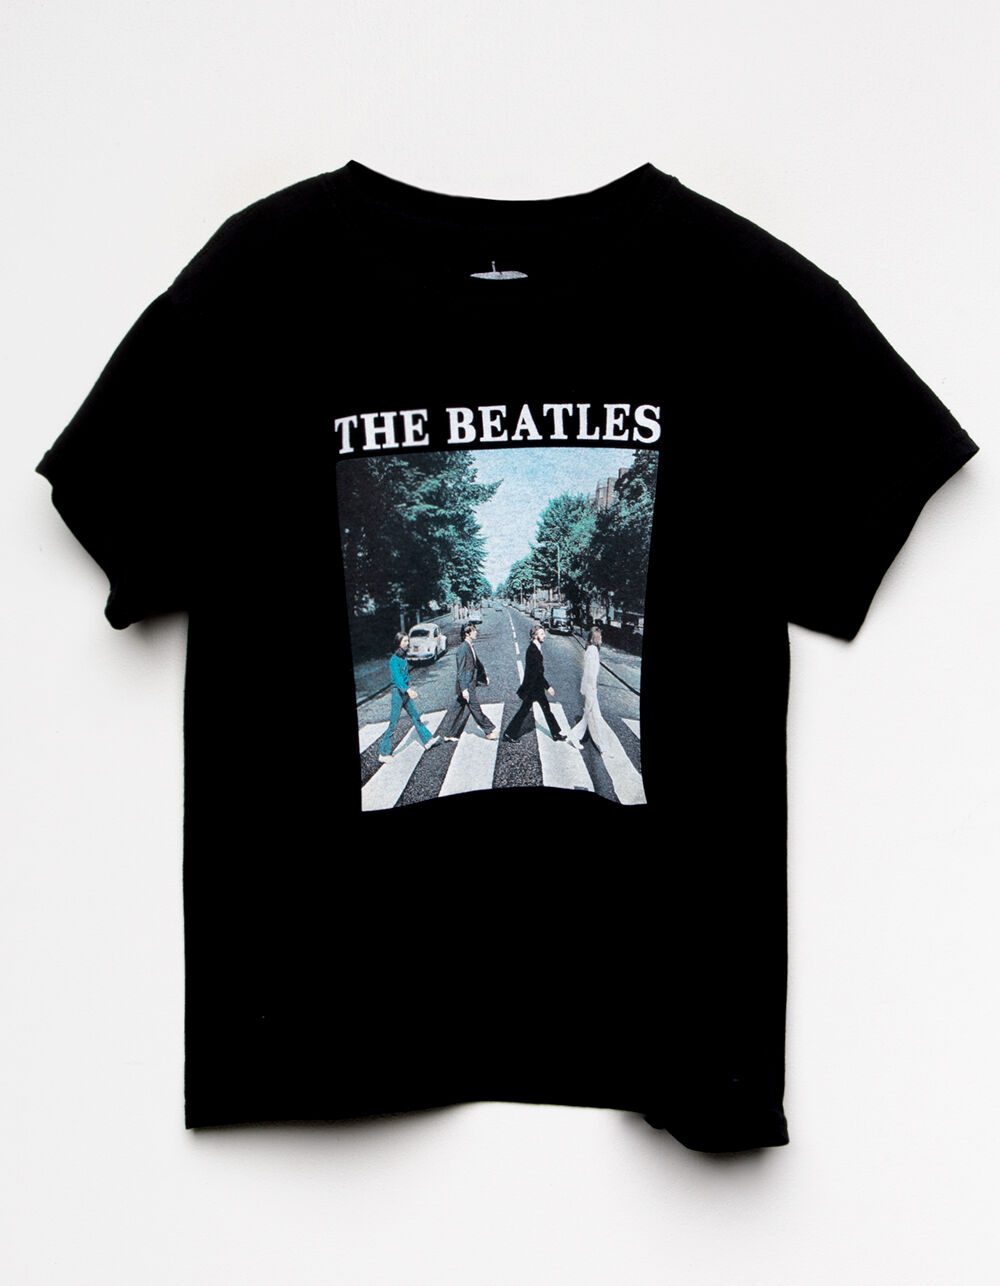 THE BEATLES Girls Tee - WASHED BLACK | Tillys